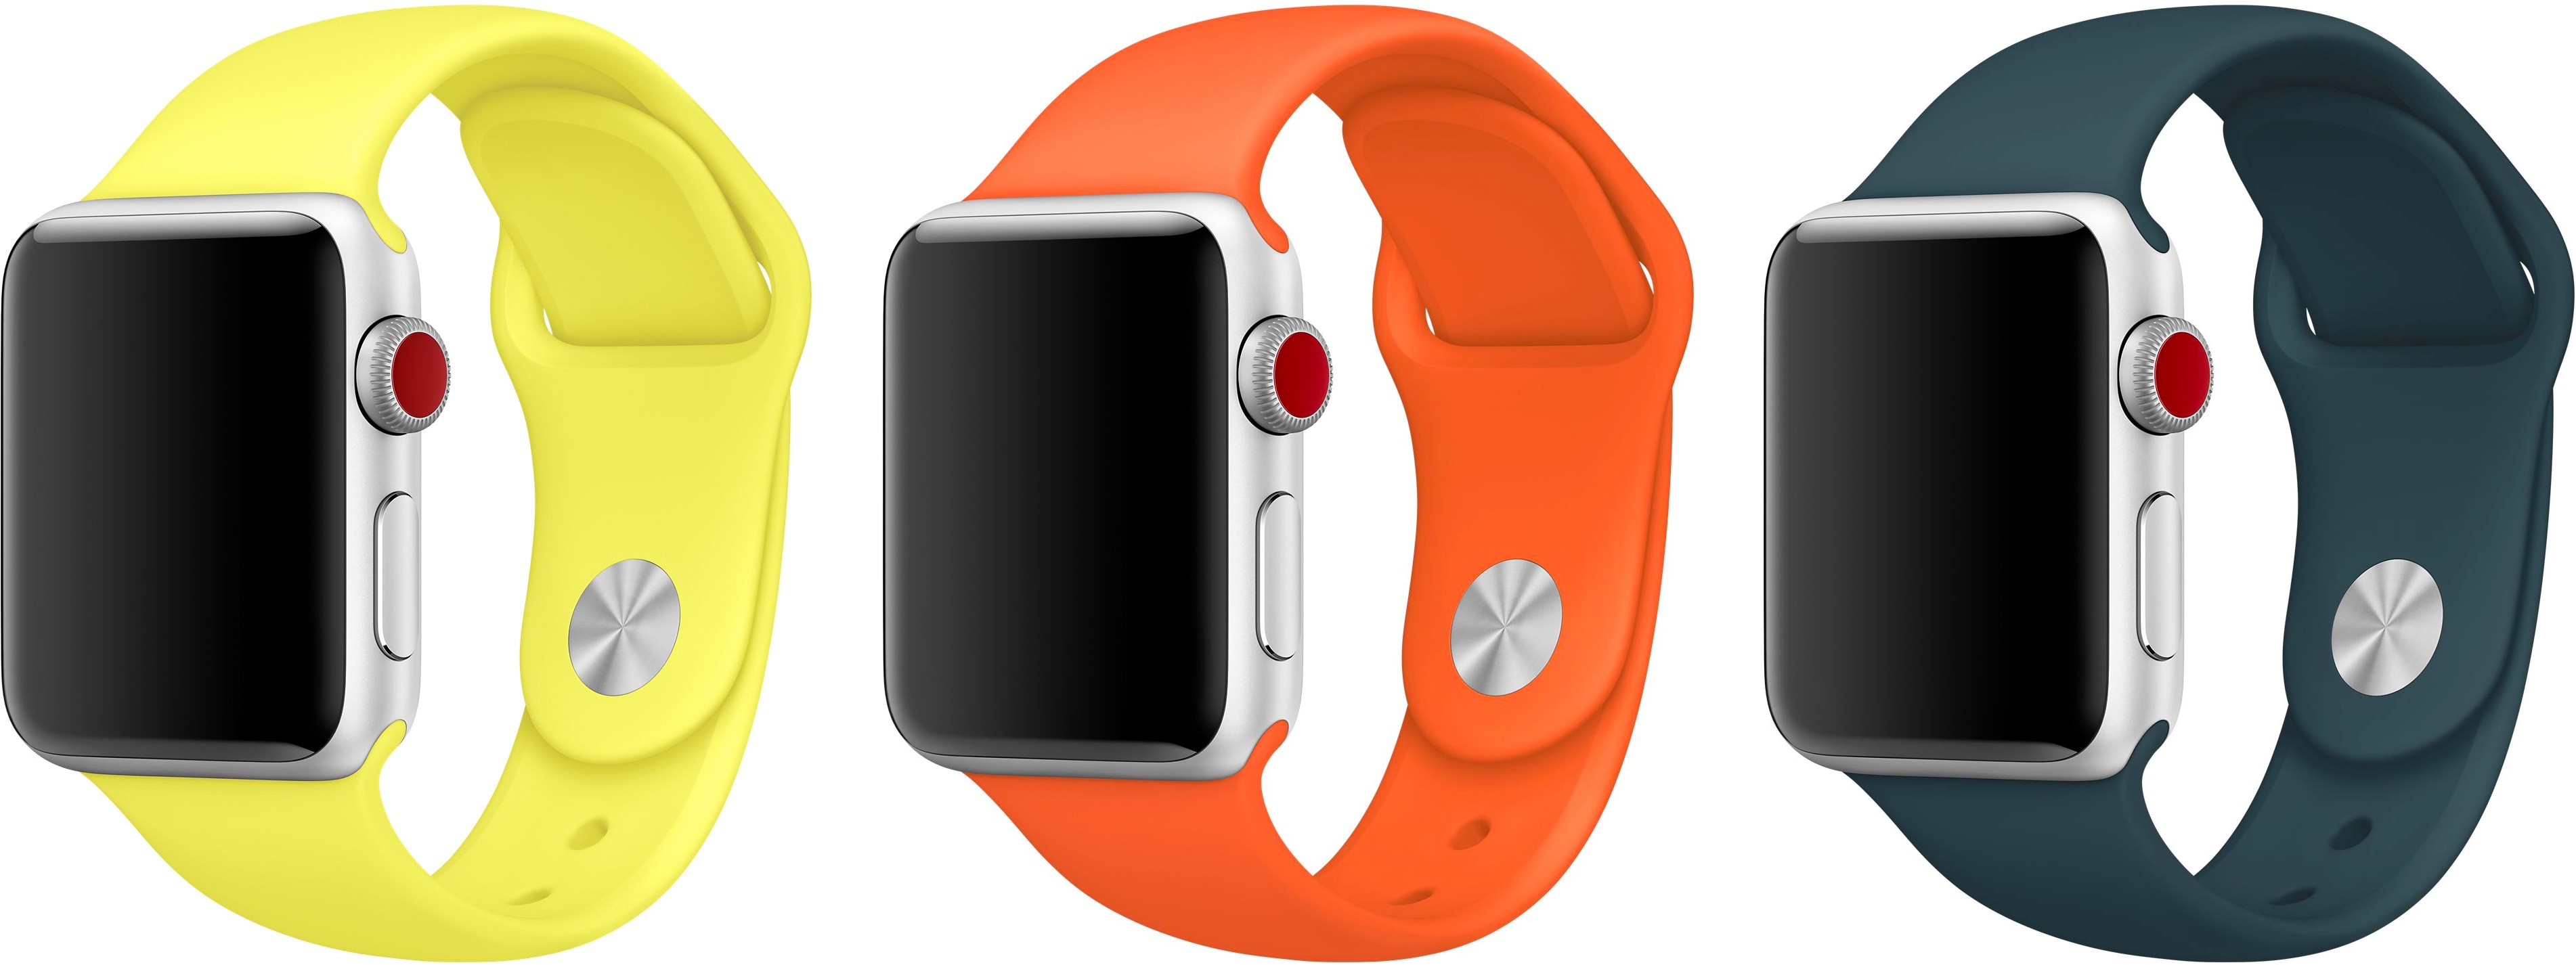 New Apple Watch Strap Colors